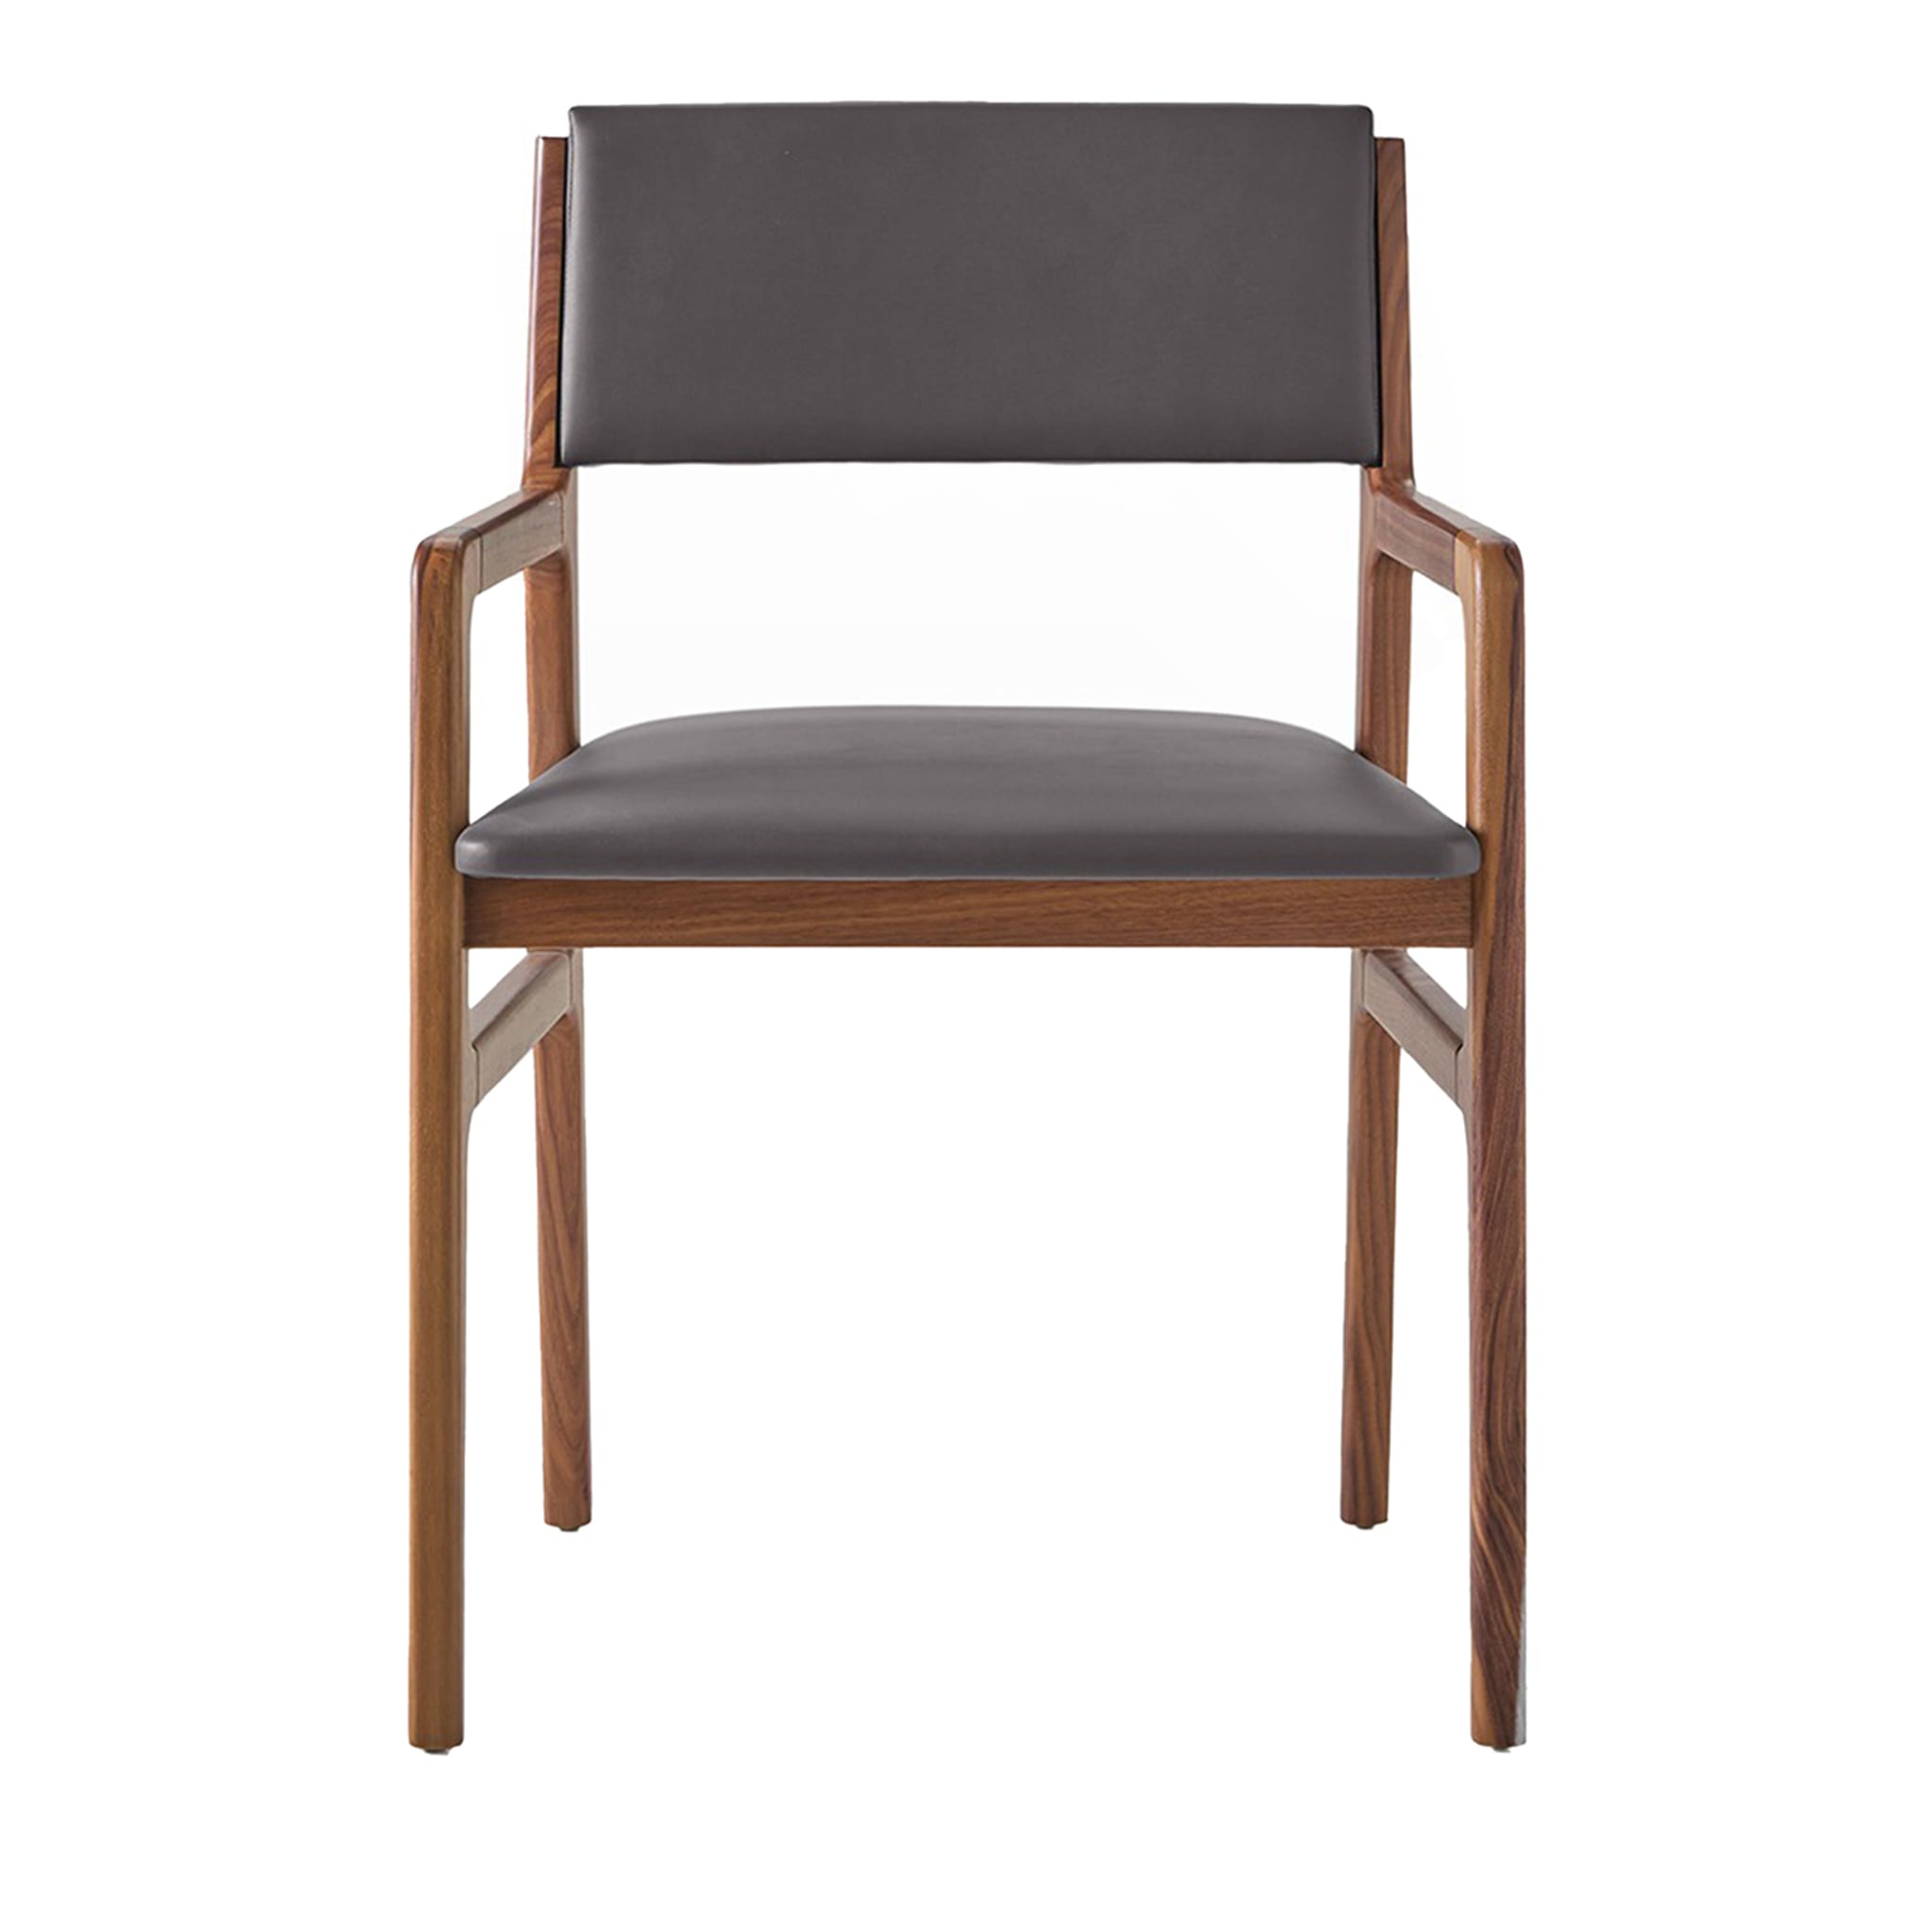 Shanghai chair with armrests - Main view